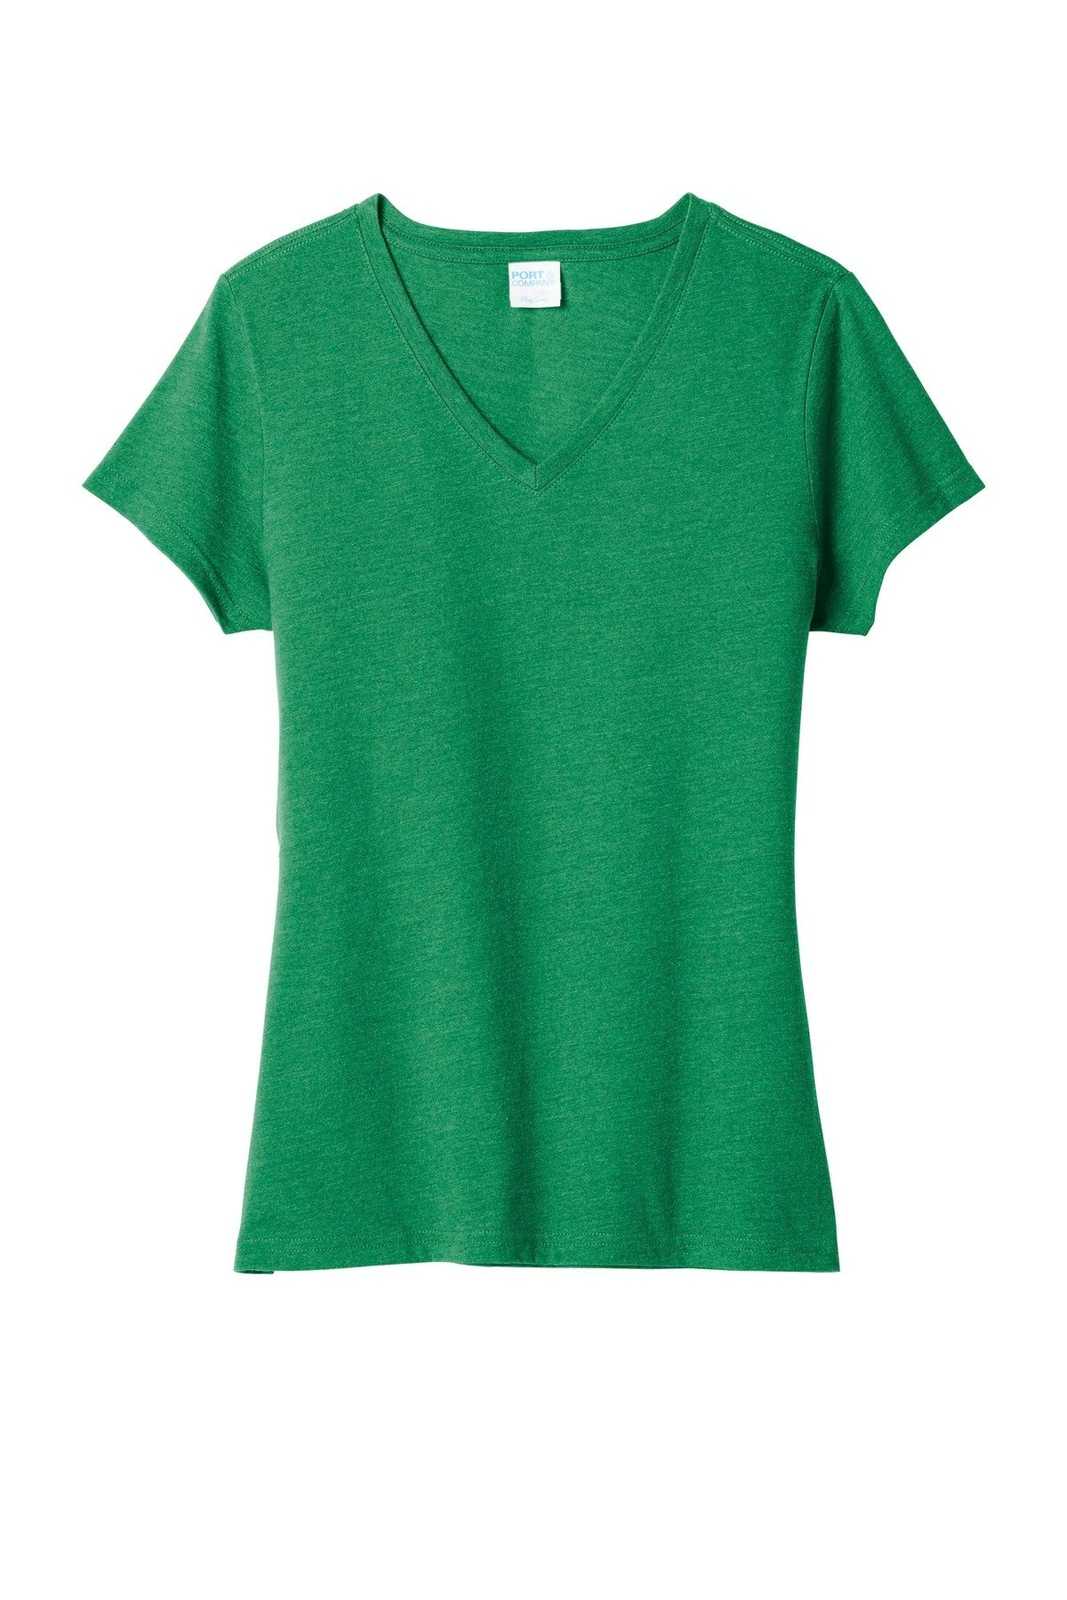 Port &amp; Company LPC455V Ladies Fan Favorite Blend V-Neck Tee - Athletic Kelly Green Heather - HIT a Double - 5